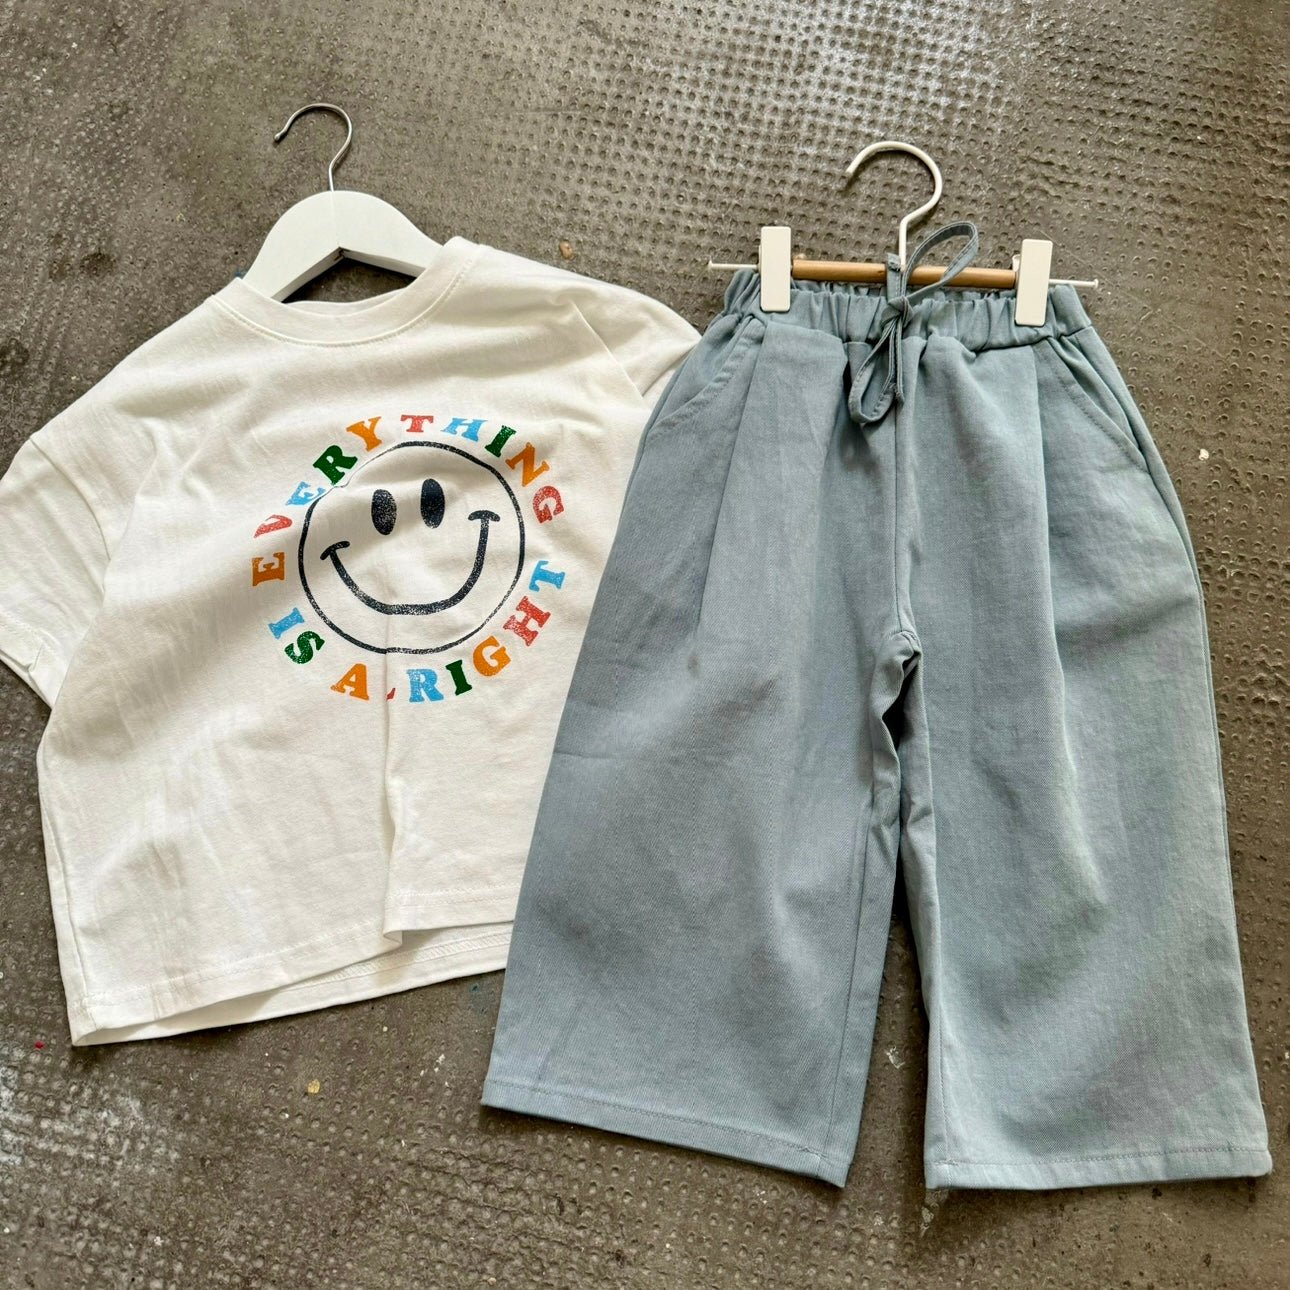 String Wide Pants find Stylish Fashion for Little People- at Little Foxx Concept Store